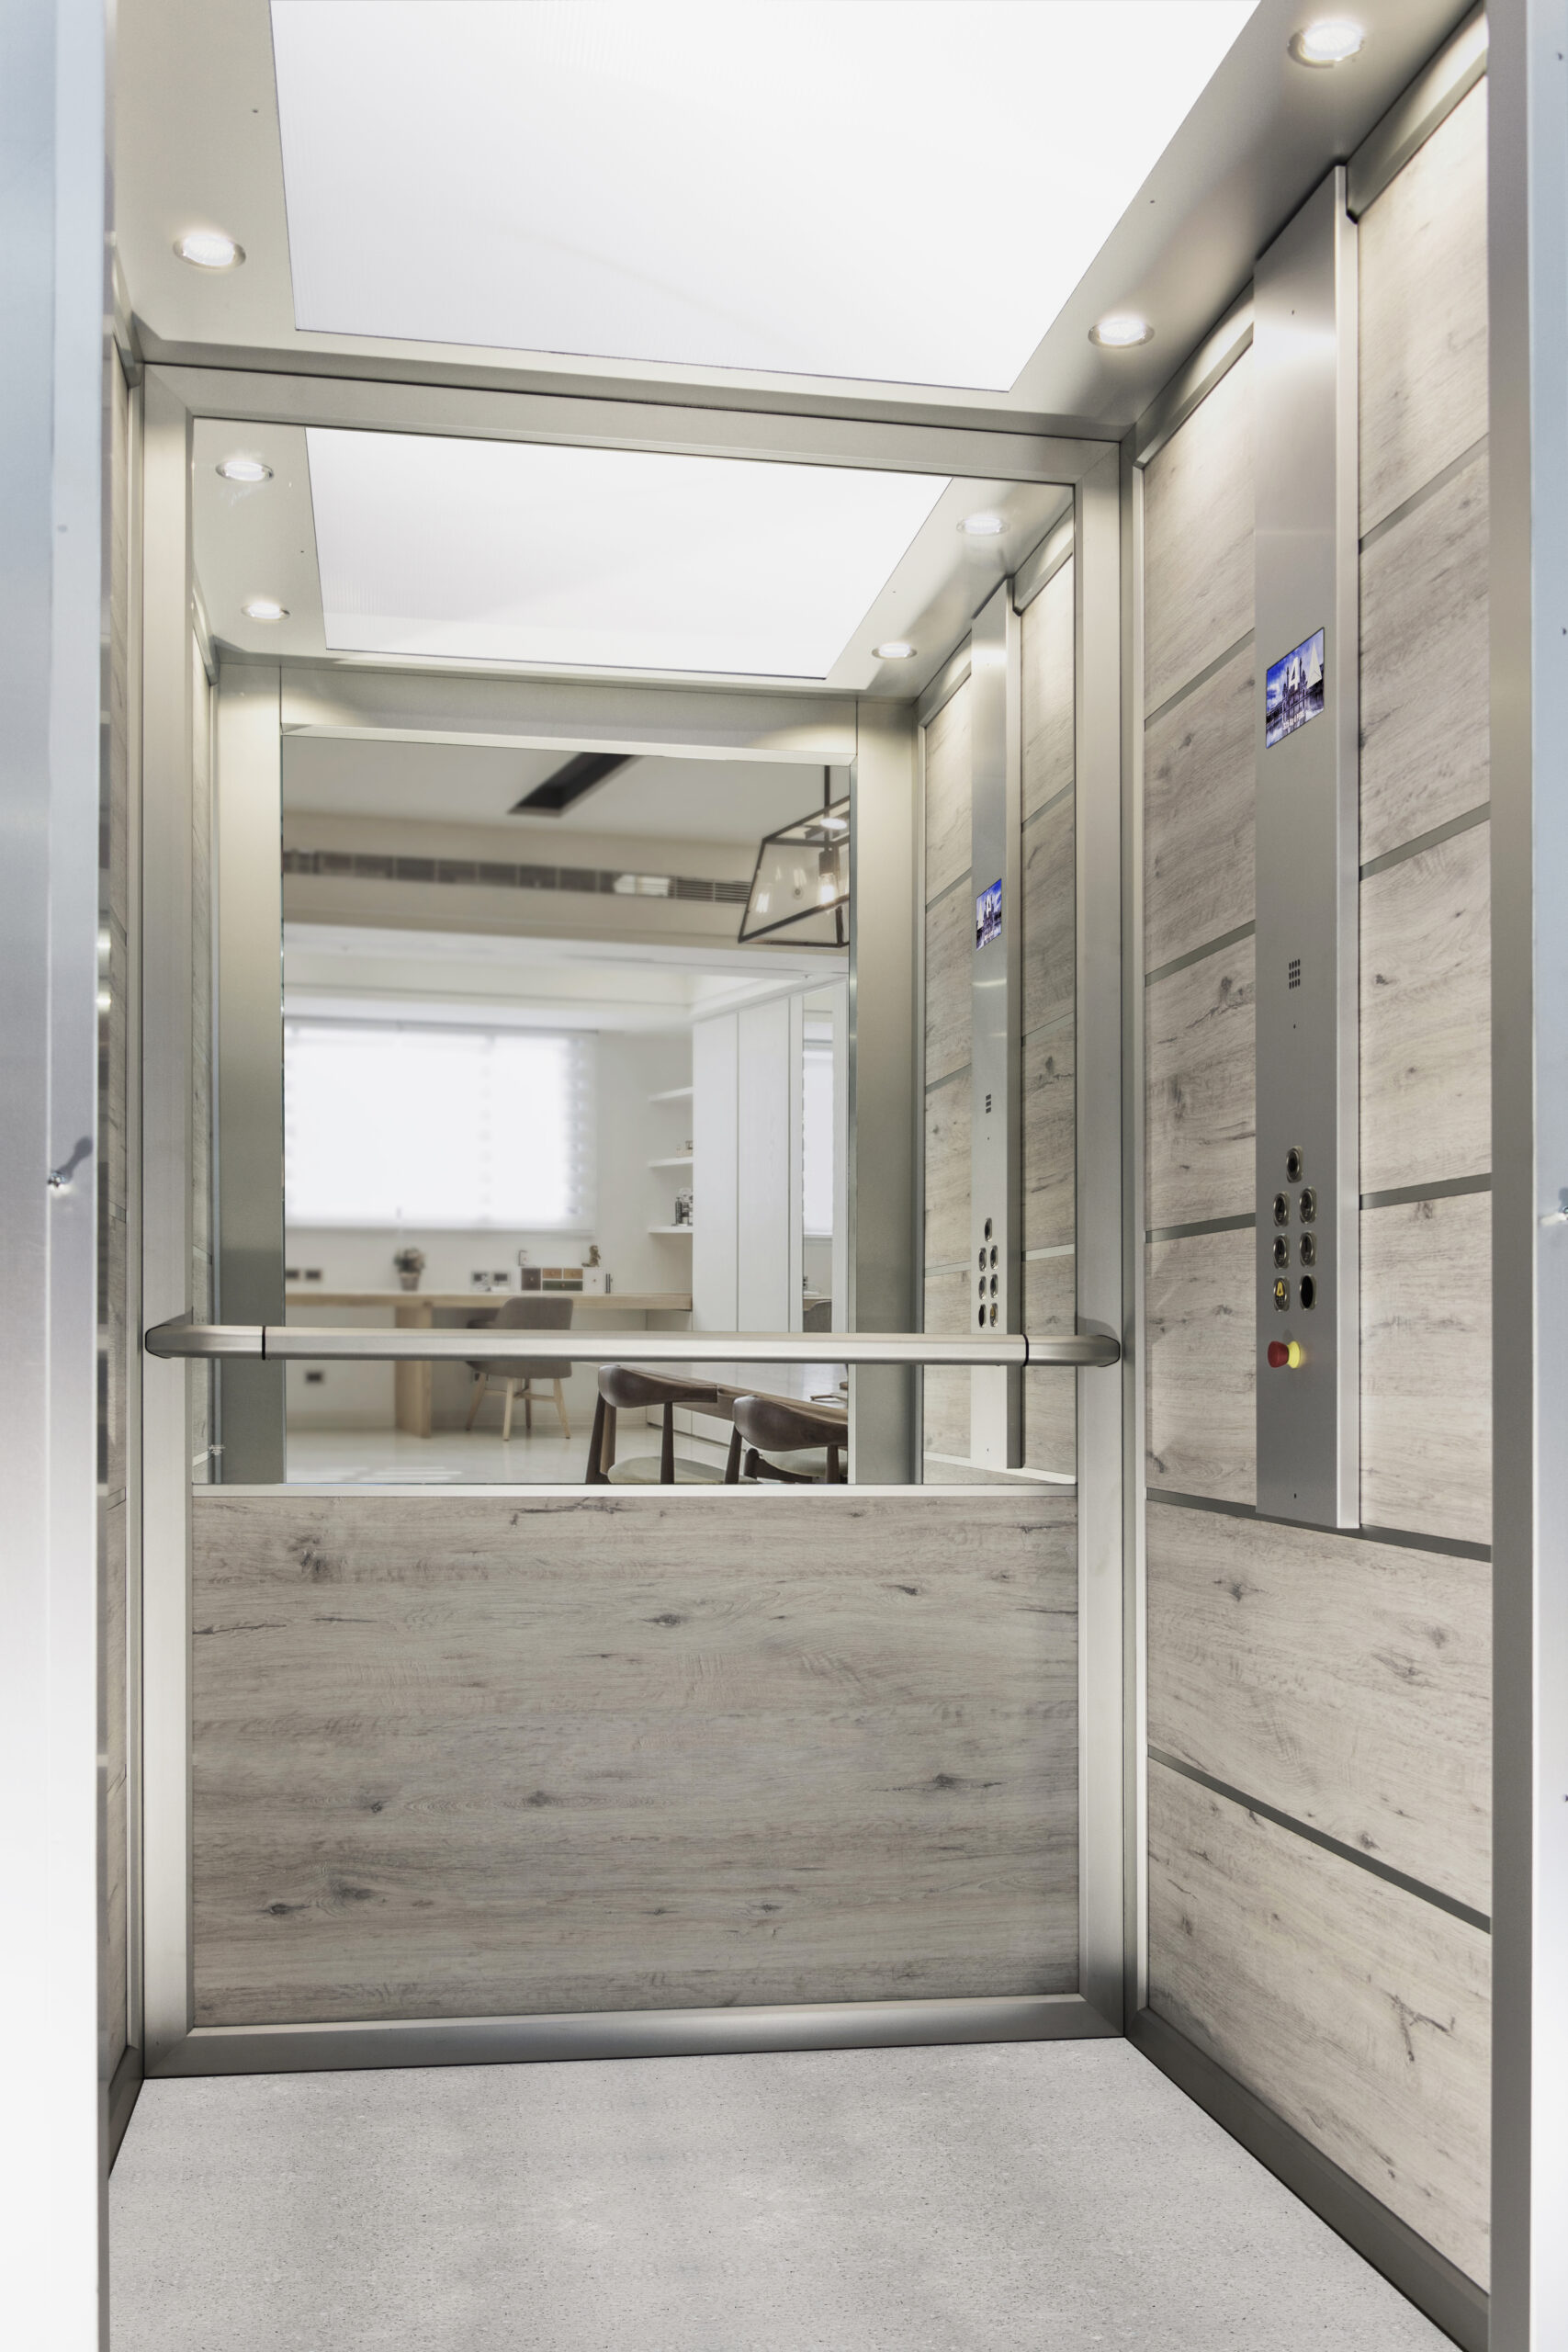 Hydraulic Elevator Smart with Full-height satin steel control panel